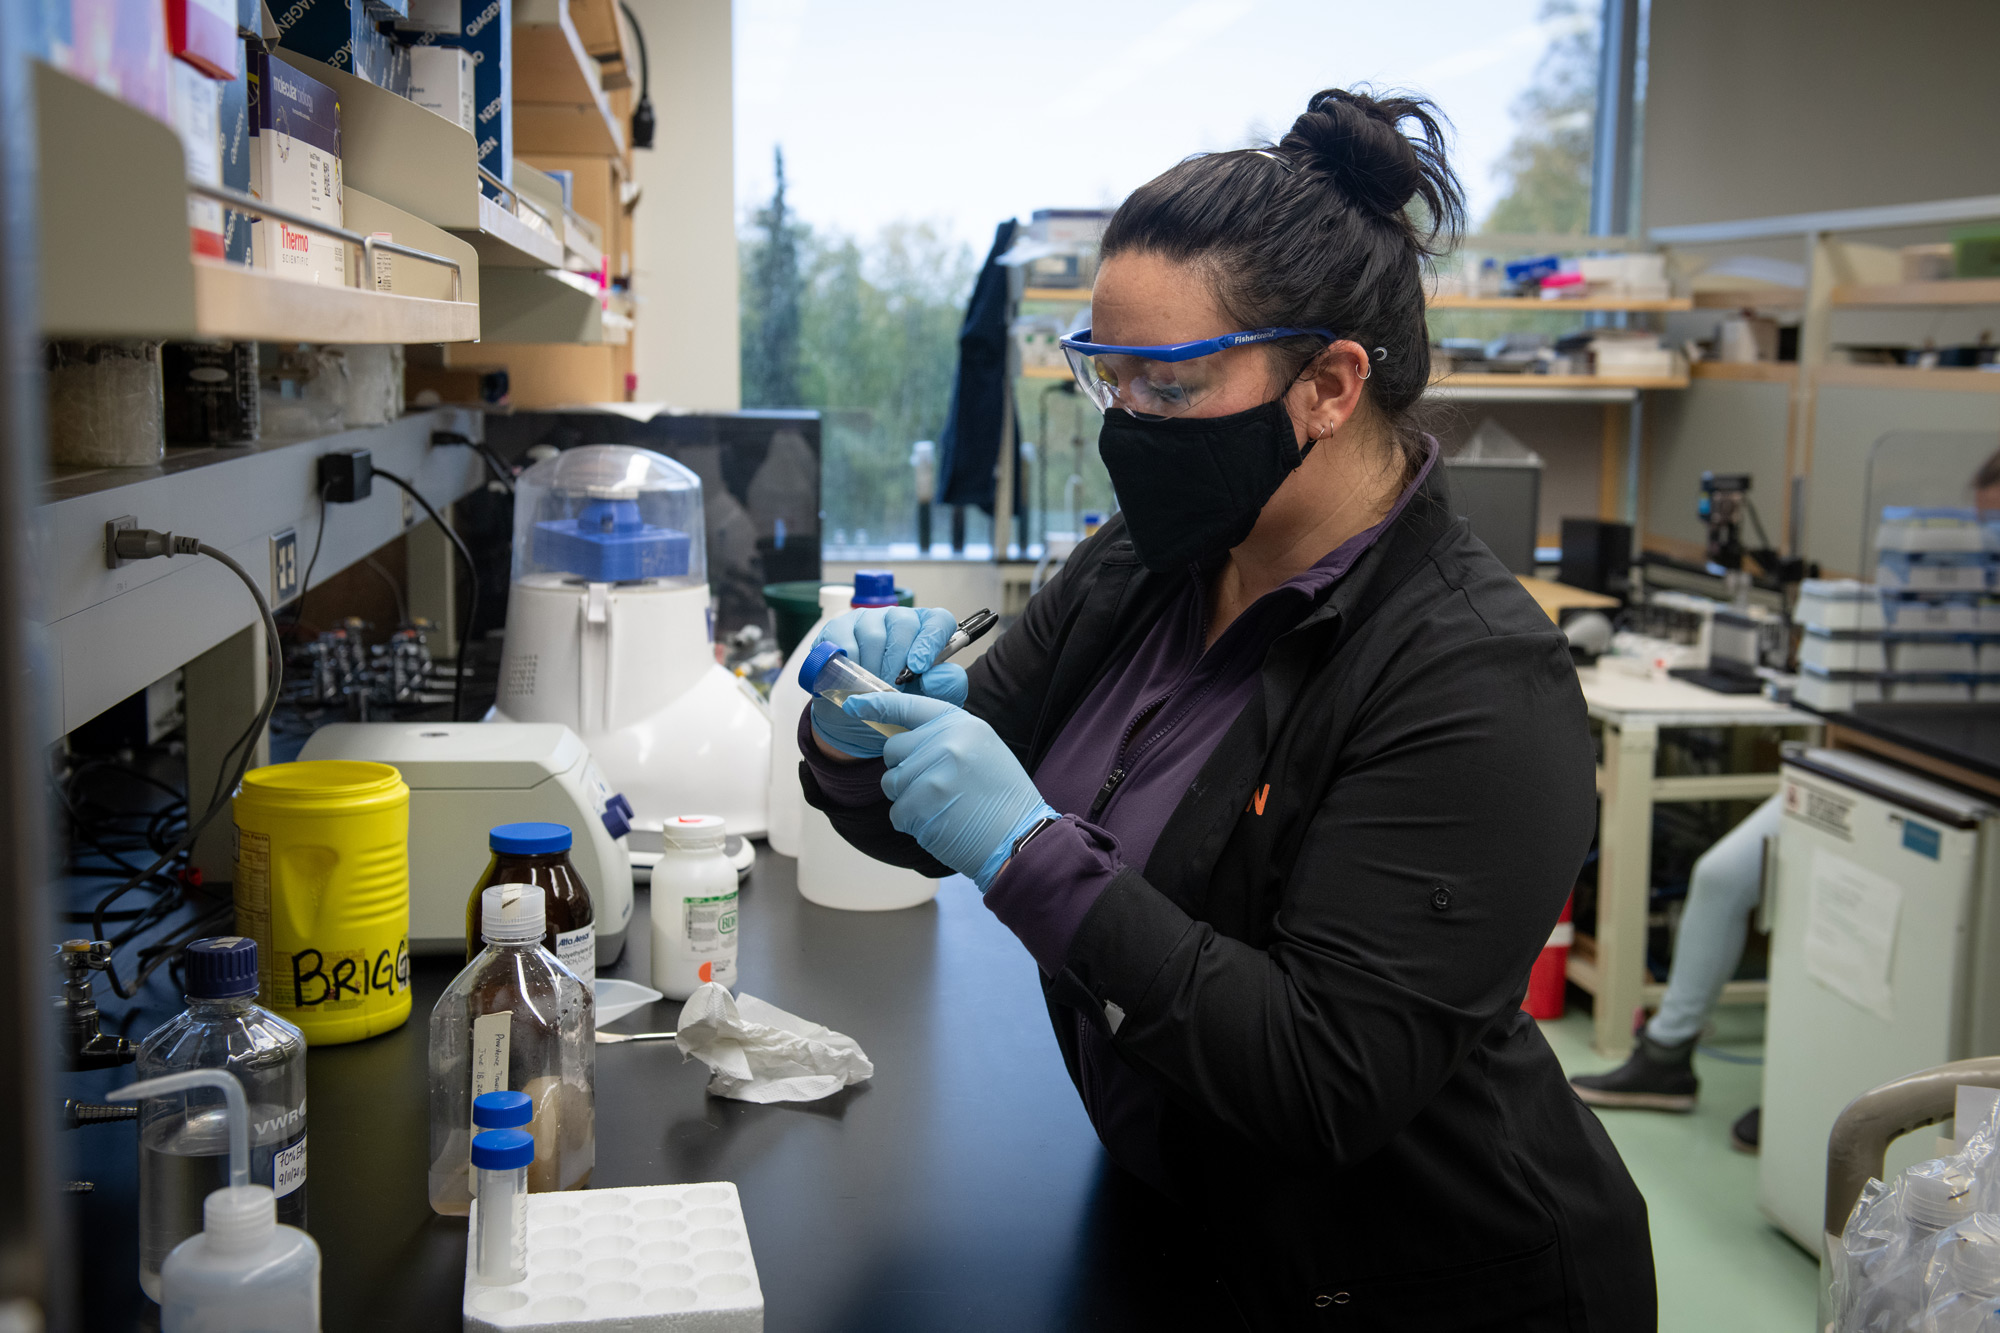 Biology and natural sciences senior Kodi Haughn prepares samples of wastewater for COVID-19 testing in Professor Brandon Briggs' lab in UAA's ConocoPhillips Integrated Science Building. (Photo by James Evans / University of Alaska Anchorage)